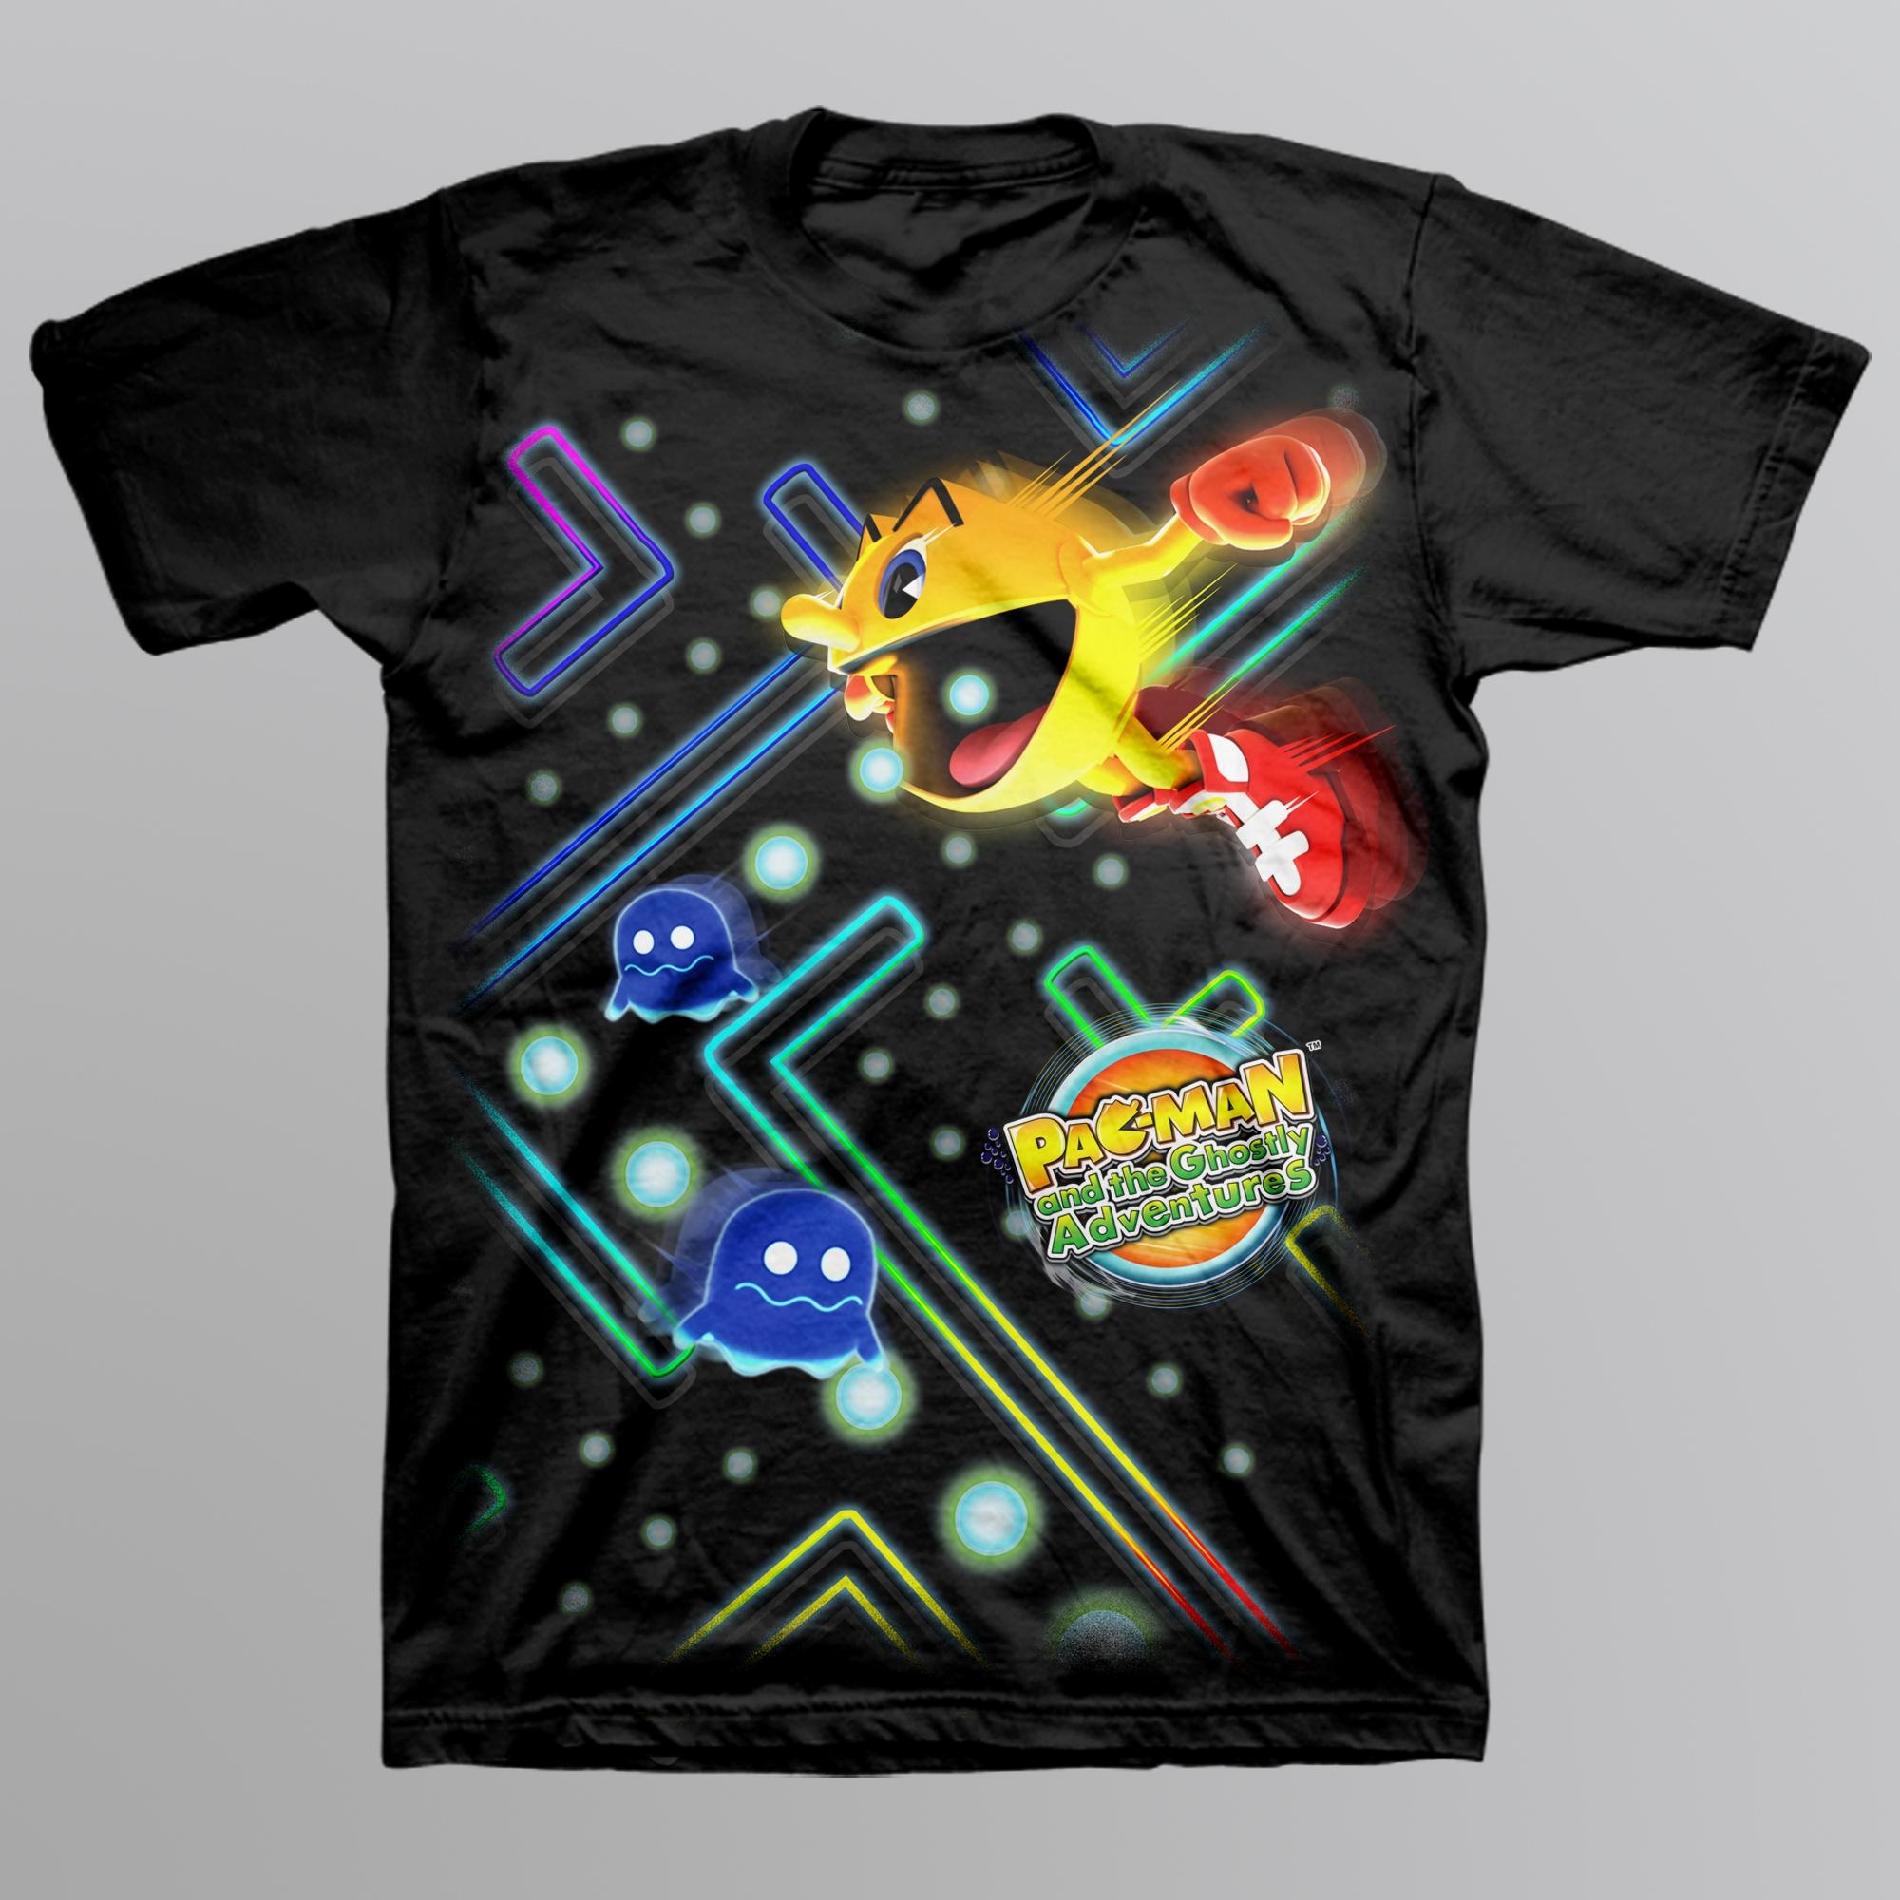 Boy's Graphic T-Shirt - Pac-Man & Ghostly Adventures